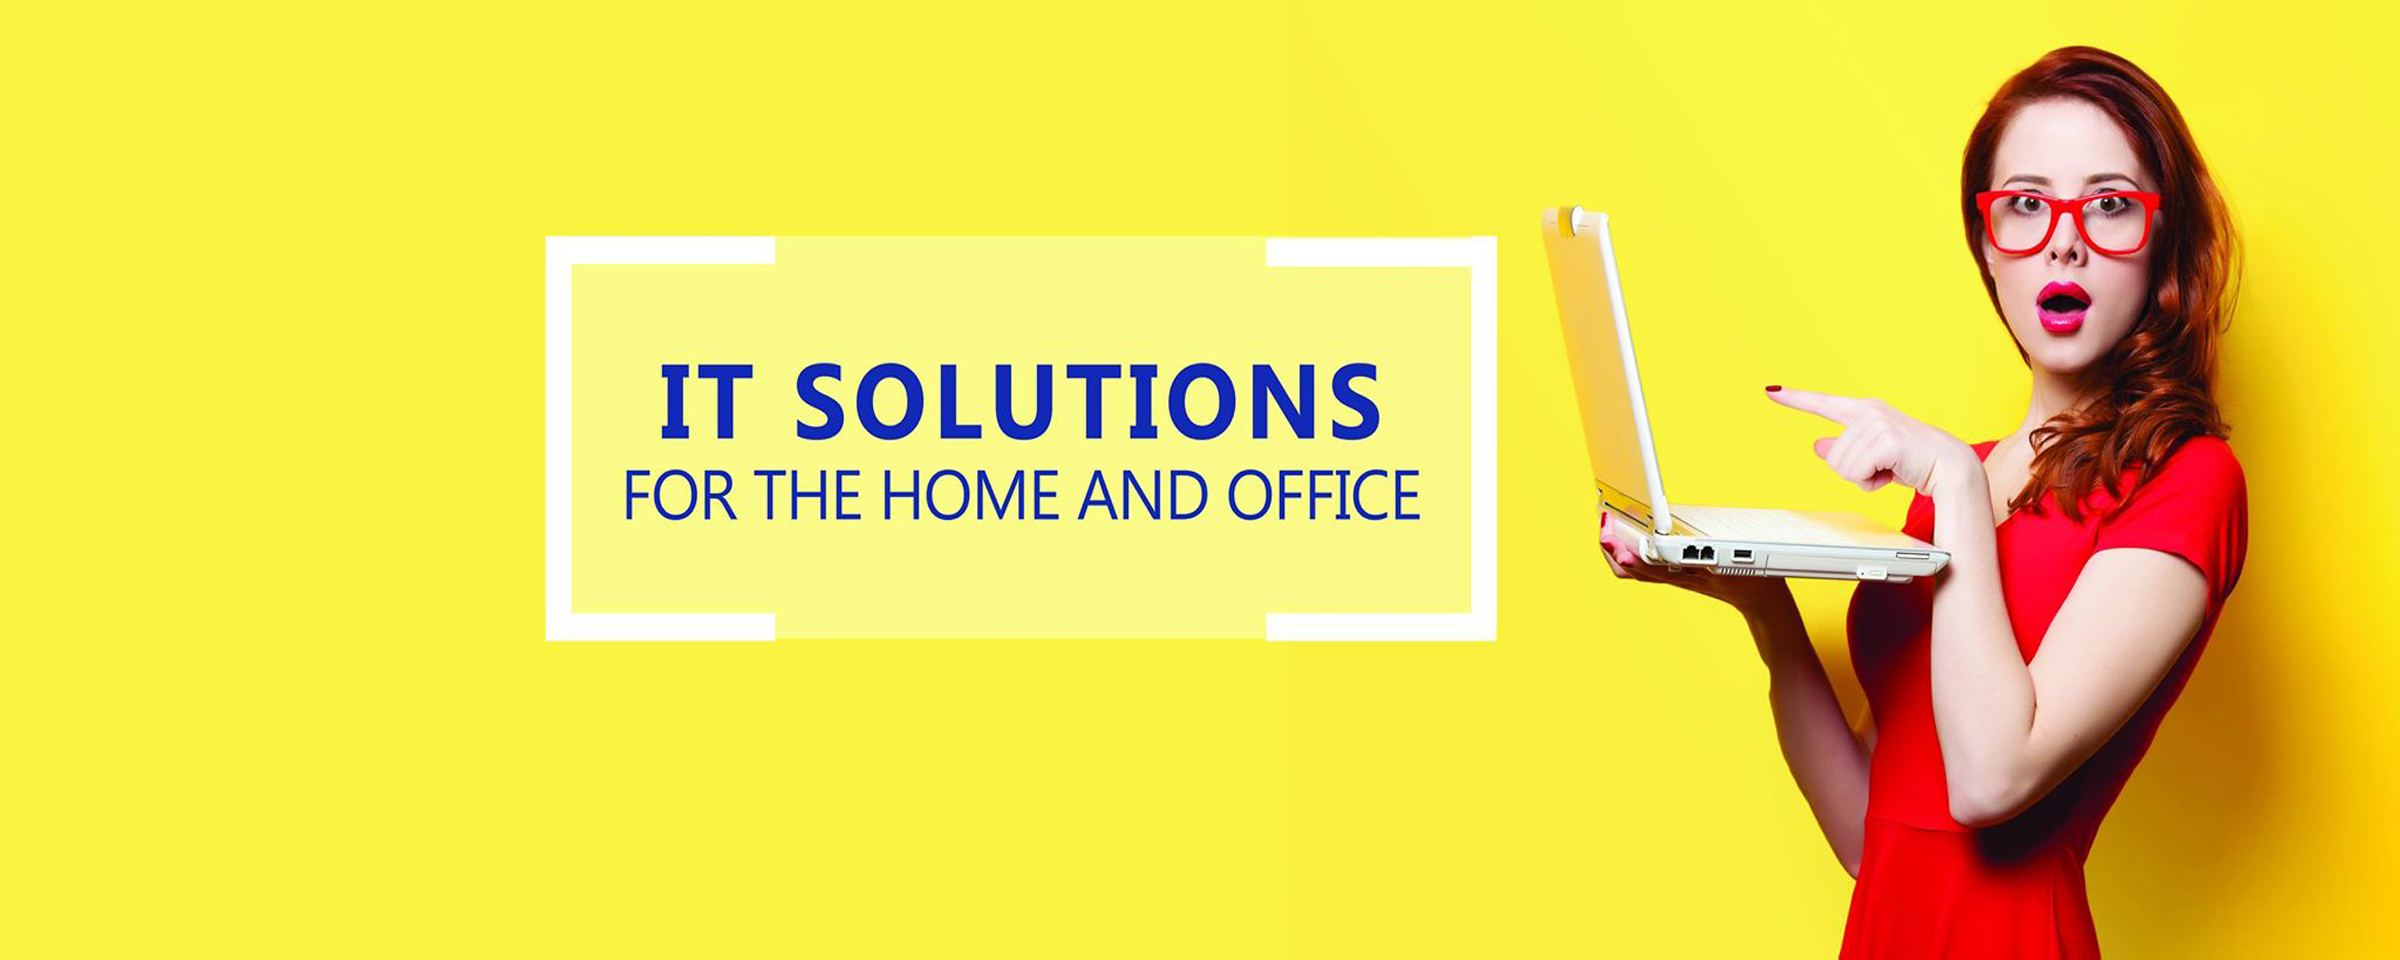 IT Solutions for the Home and Office